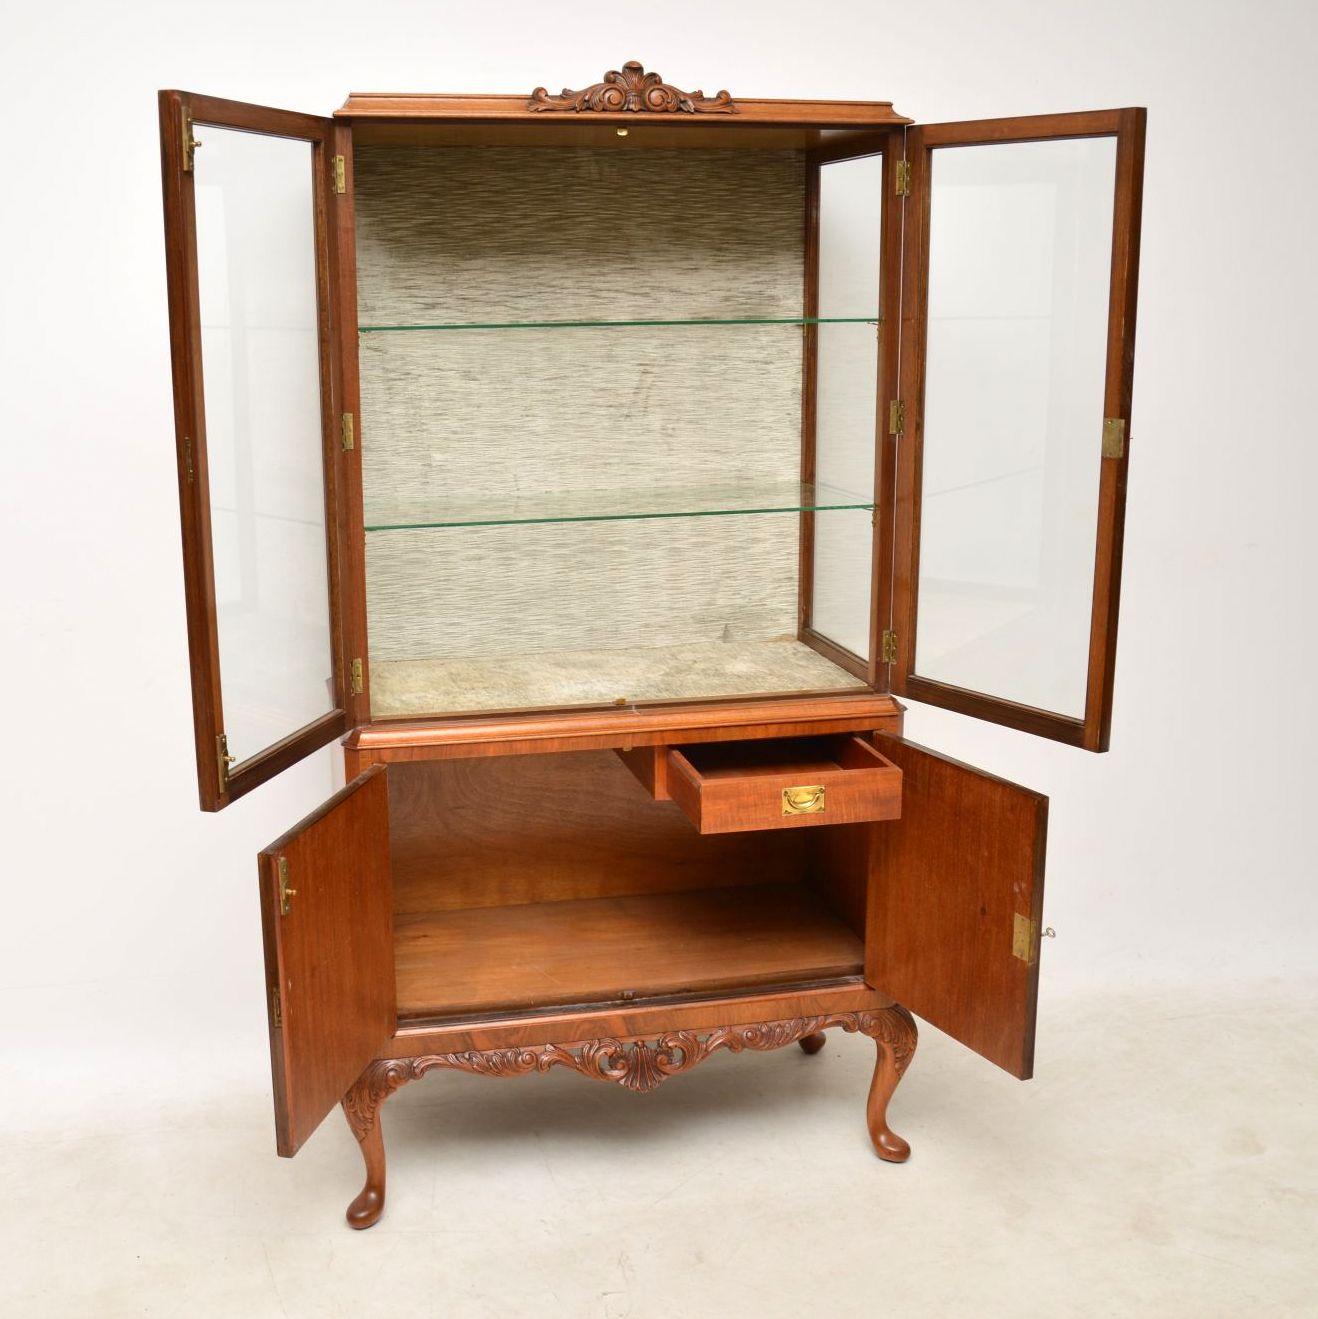 Antique burr walnut display cabinet dating from around the 1920s period & in excellent condition, having just been polished. The display section is lined in a fabric which is still in good condition and has two glass shelves. The bottom section has